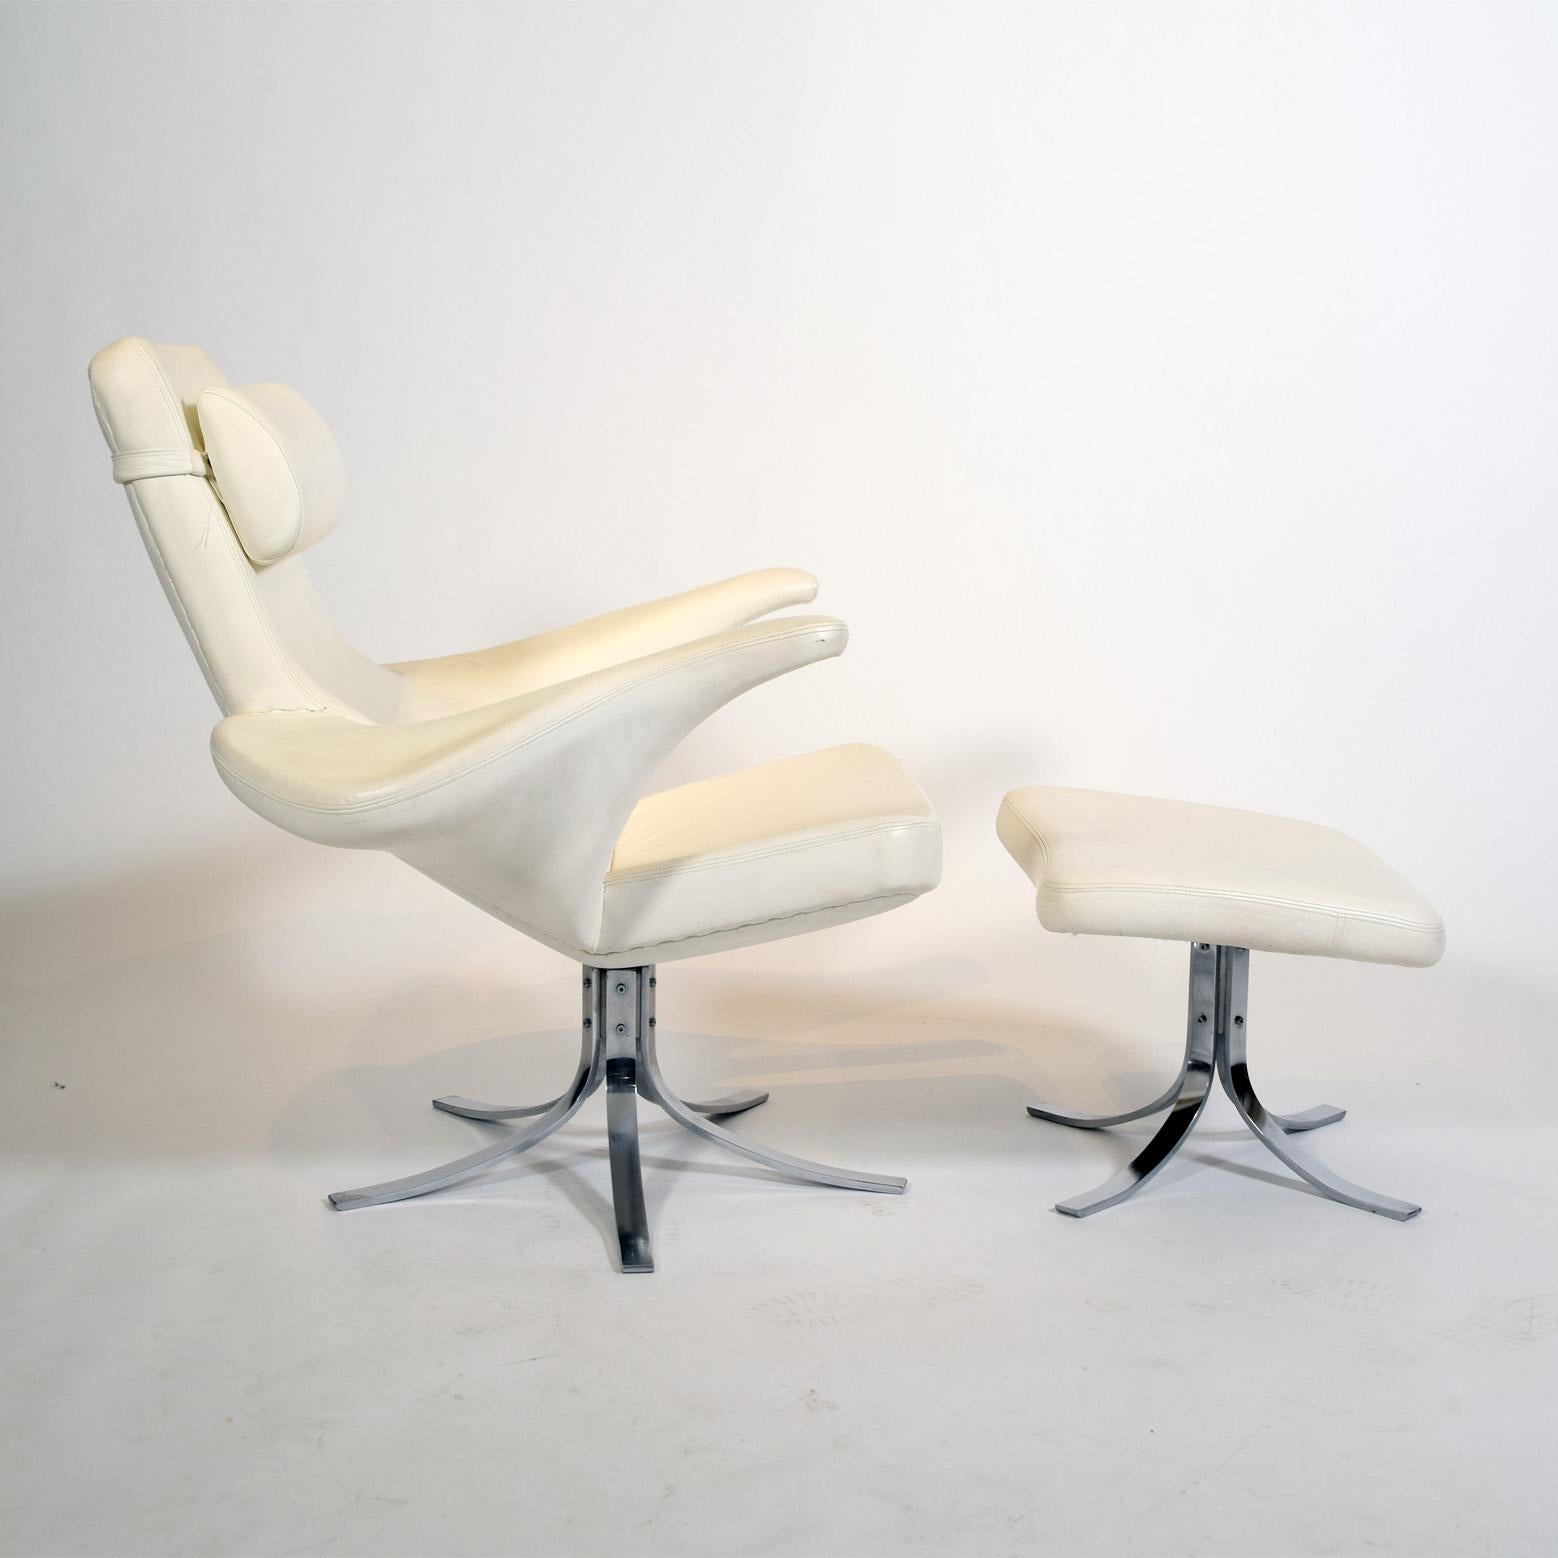 Gösta Berg and Sten Erik Eriksson Seagull chair and ottoman manufacturer's label to underside of chair and ottoman ‘FH Made in Denmark 7104 by Fritz Hansen Furniture Maker Danish Control’. Original white leather.